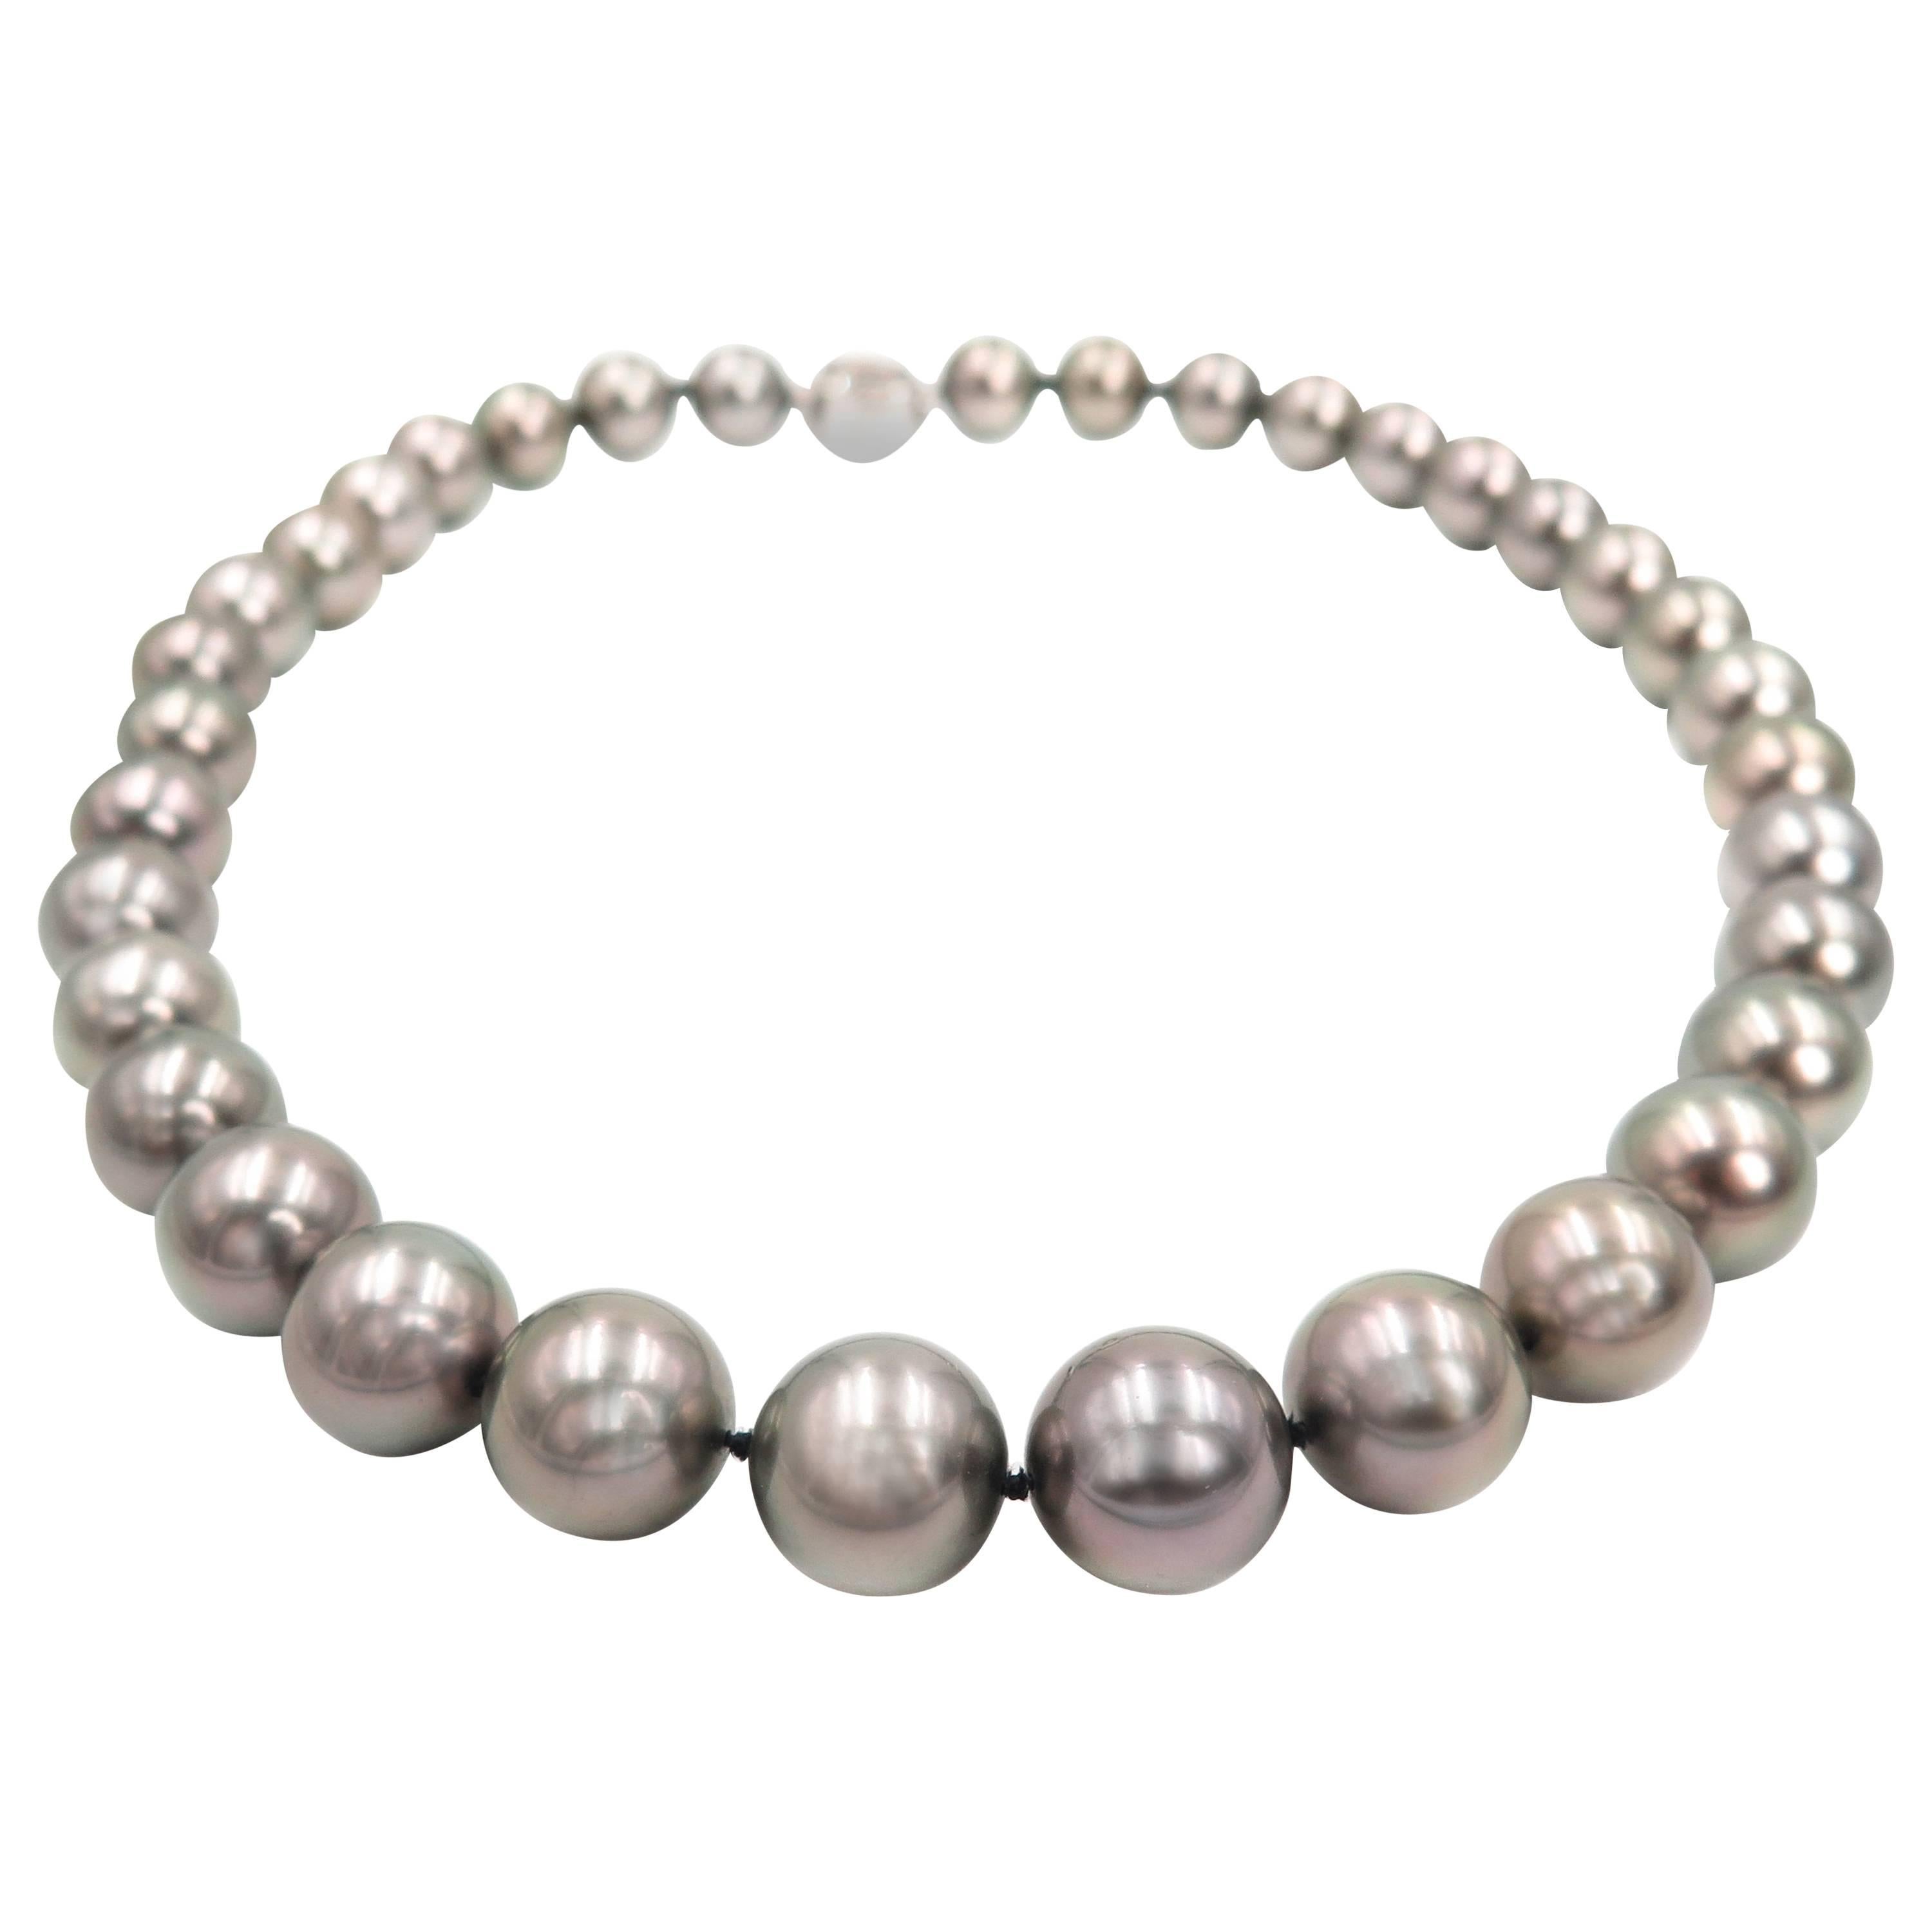 Graduated Black South Sea Pearl Necklace For Sale